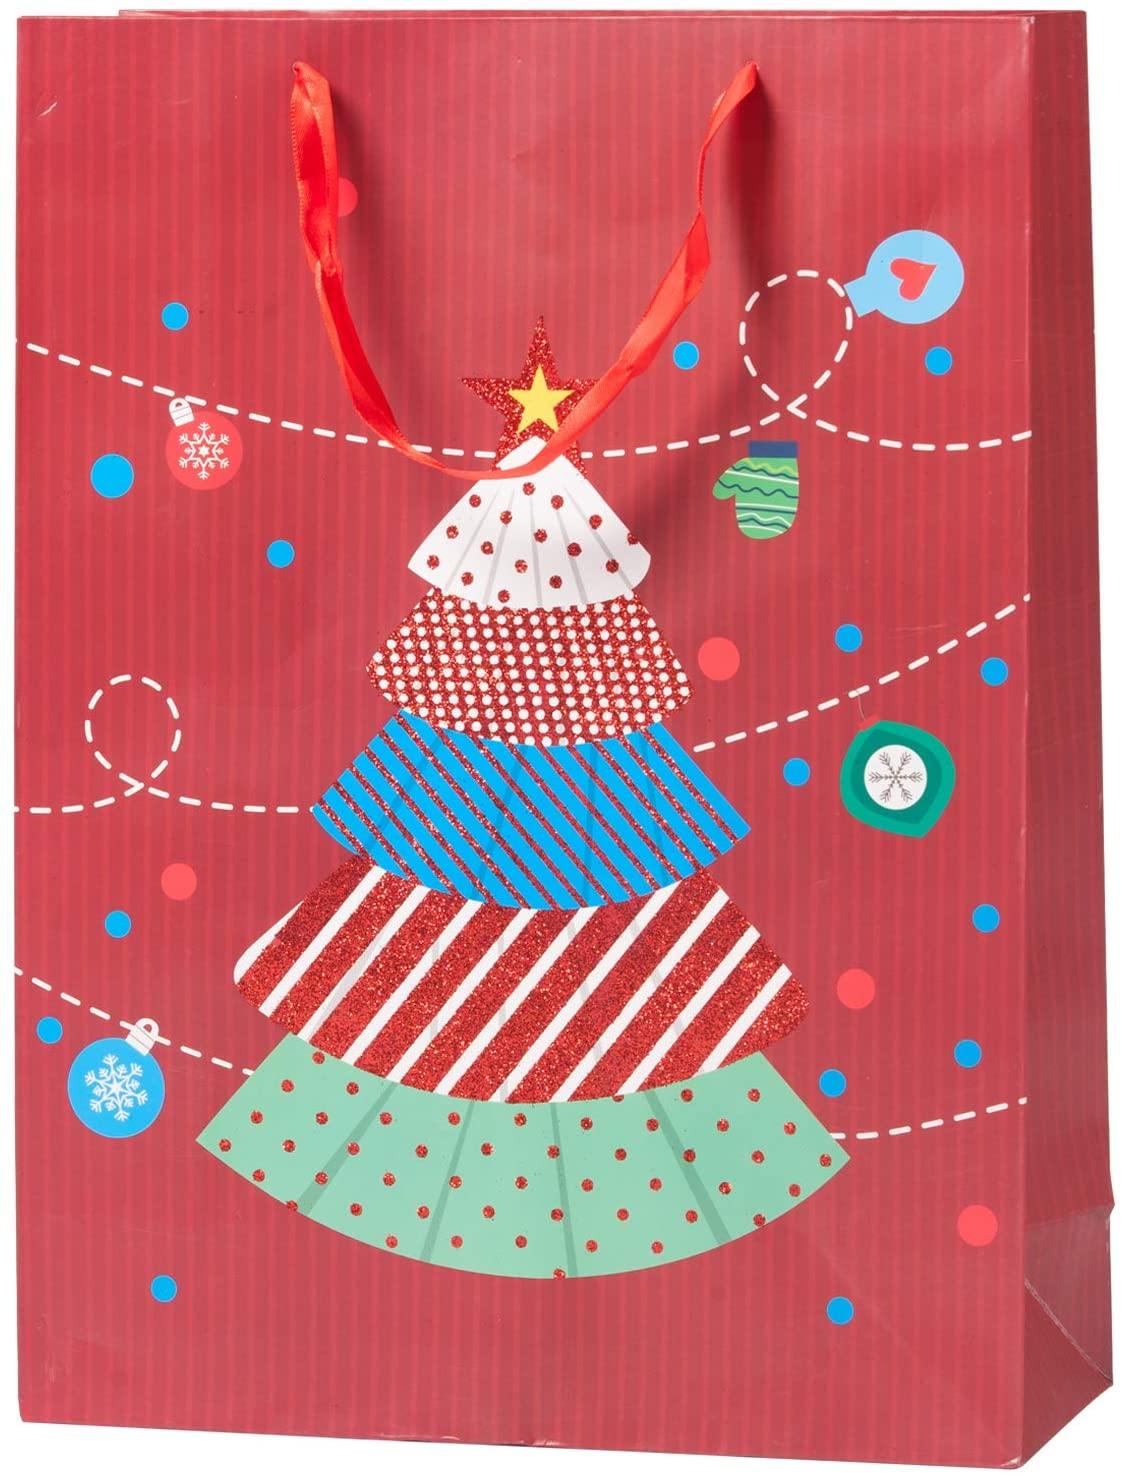 Christmas Paper Gift Bags Bulk Assortment 1 Dozen Holiday Themes Print Gift Bags with Handles 3 Sizes 4 Patterns Celebration - Bosonshop